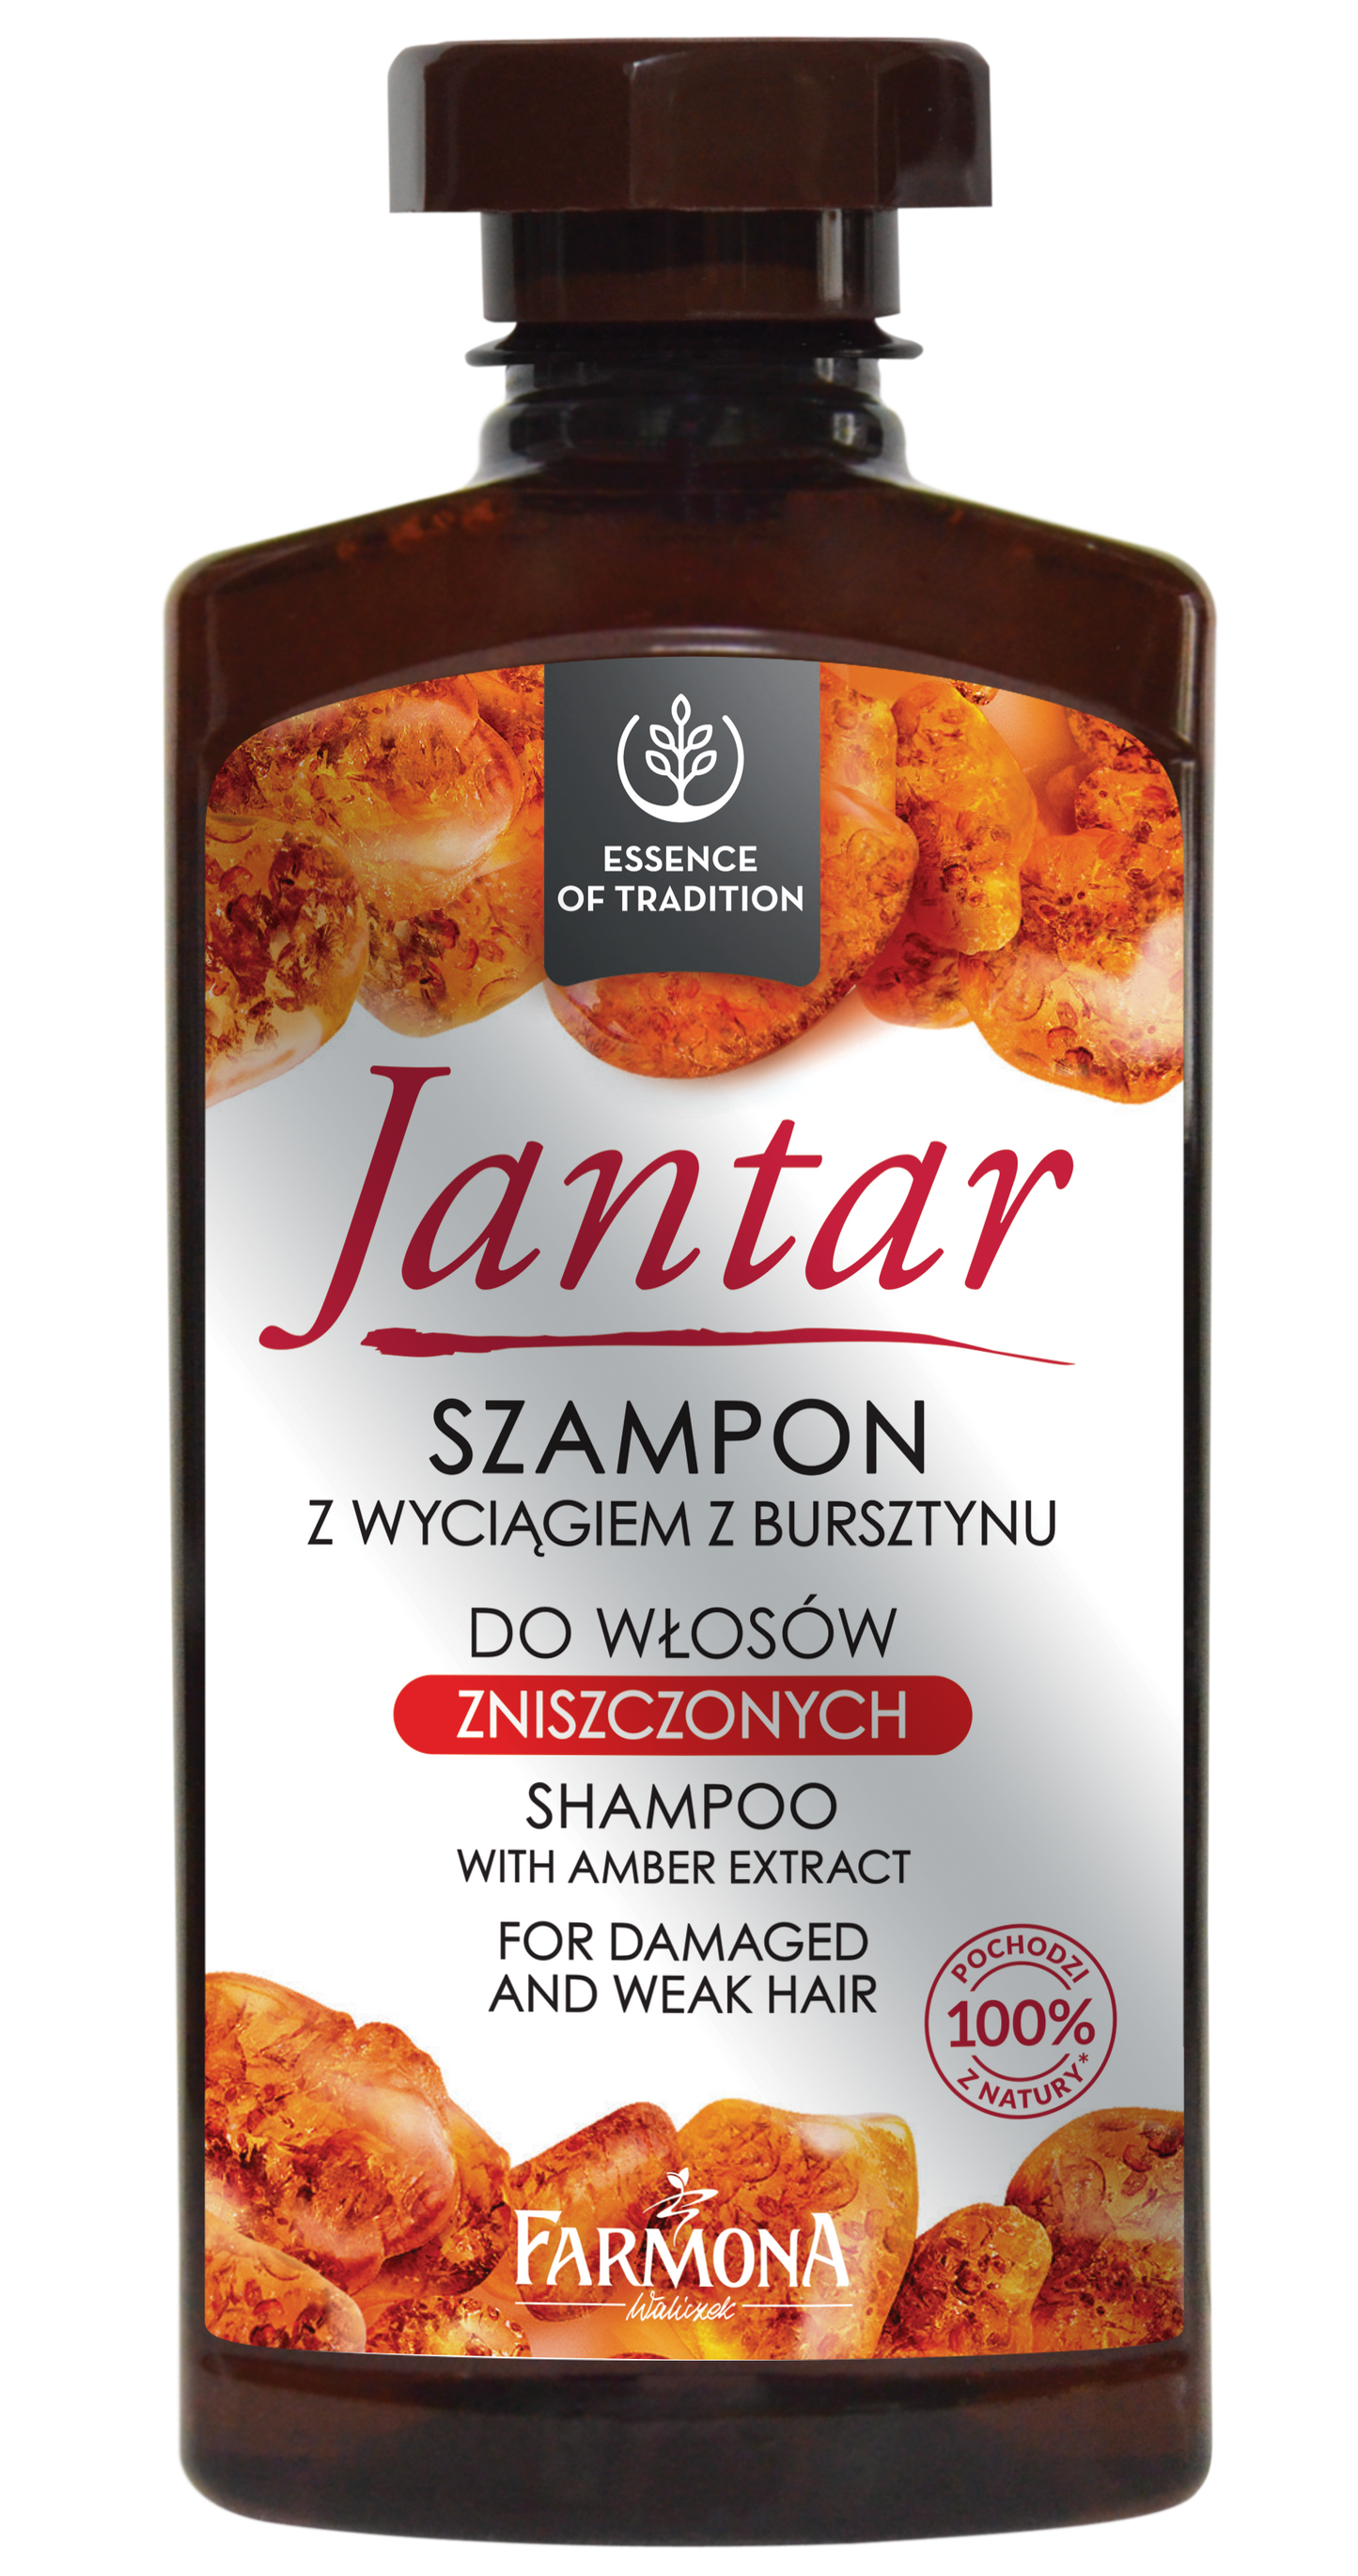 Shampoo with Amber Extract